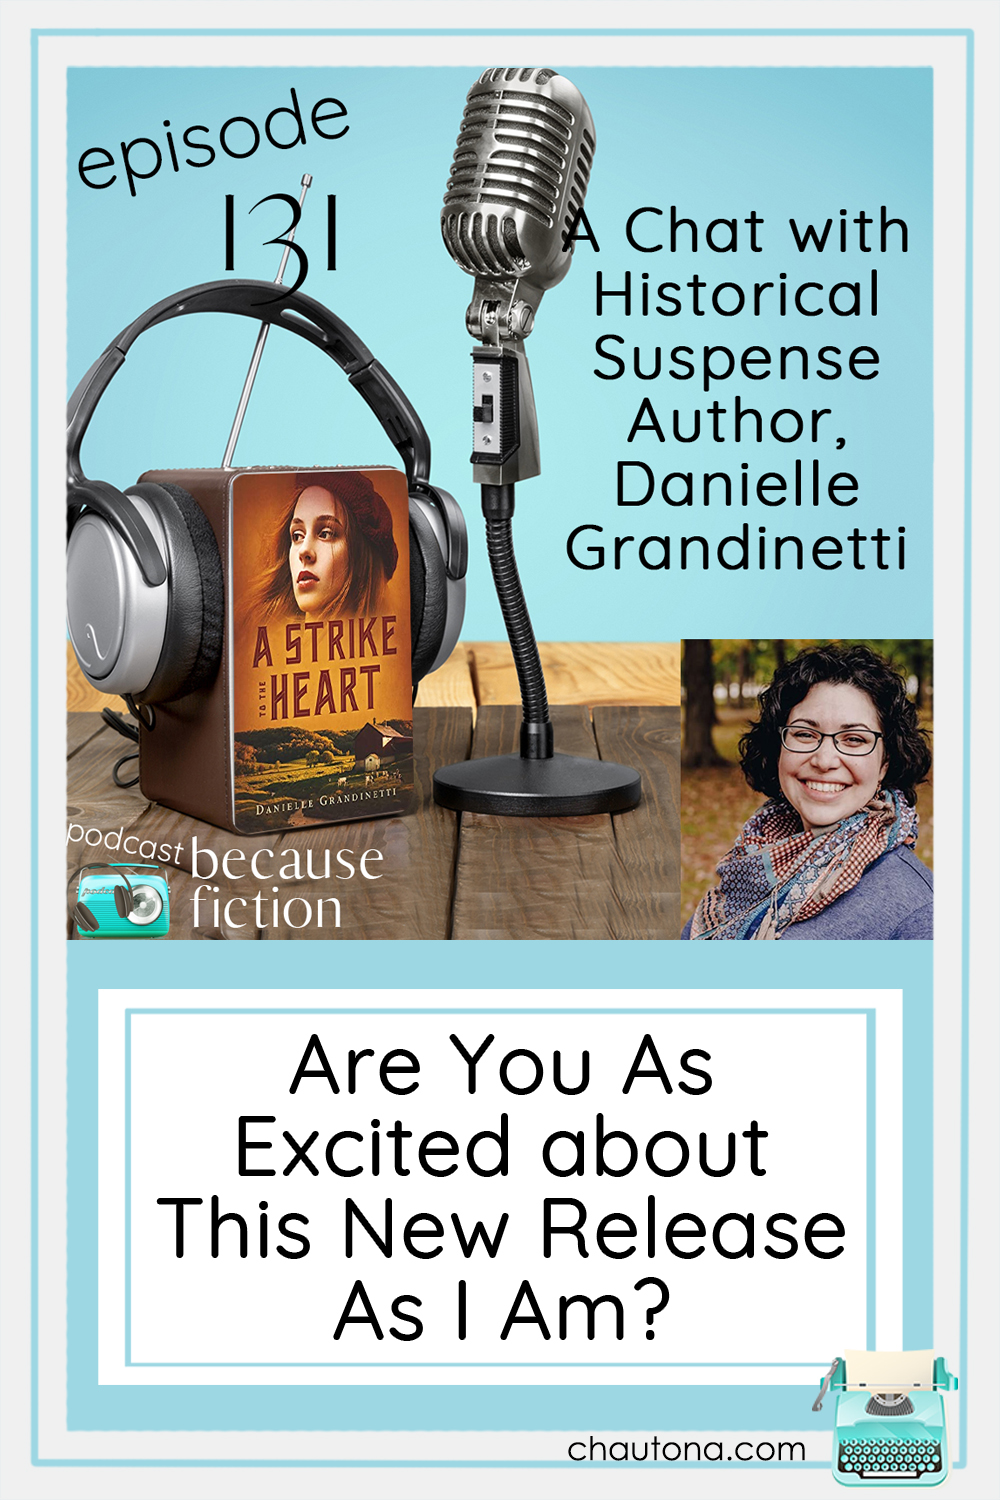 A Strike to the Heart by Danielle Grandinetti combines historical fiction with suspense, so expect to cry over spilled milk. Literally. via @chautonahavig